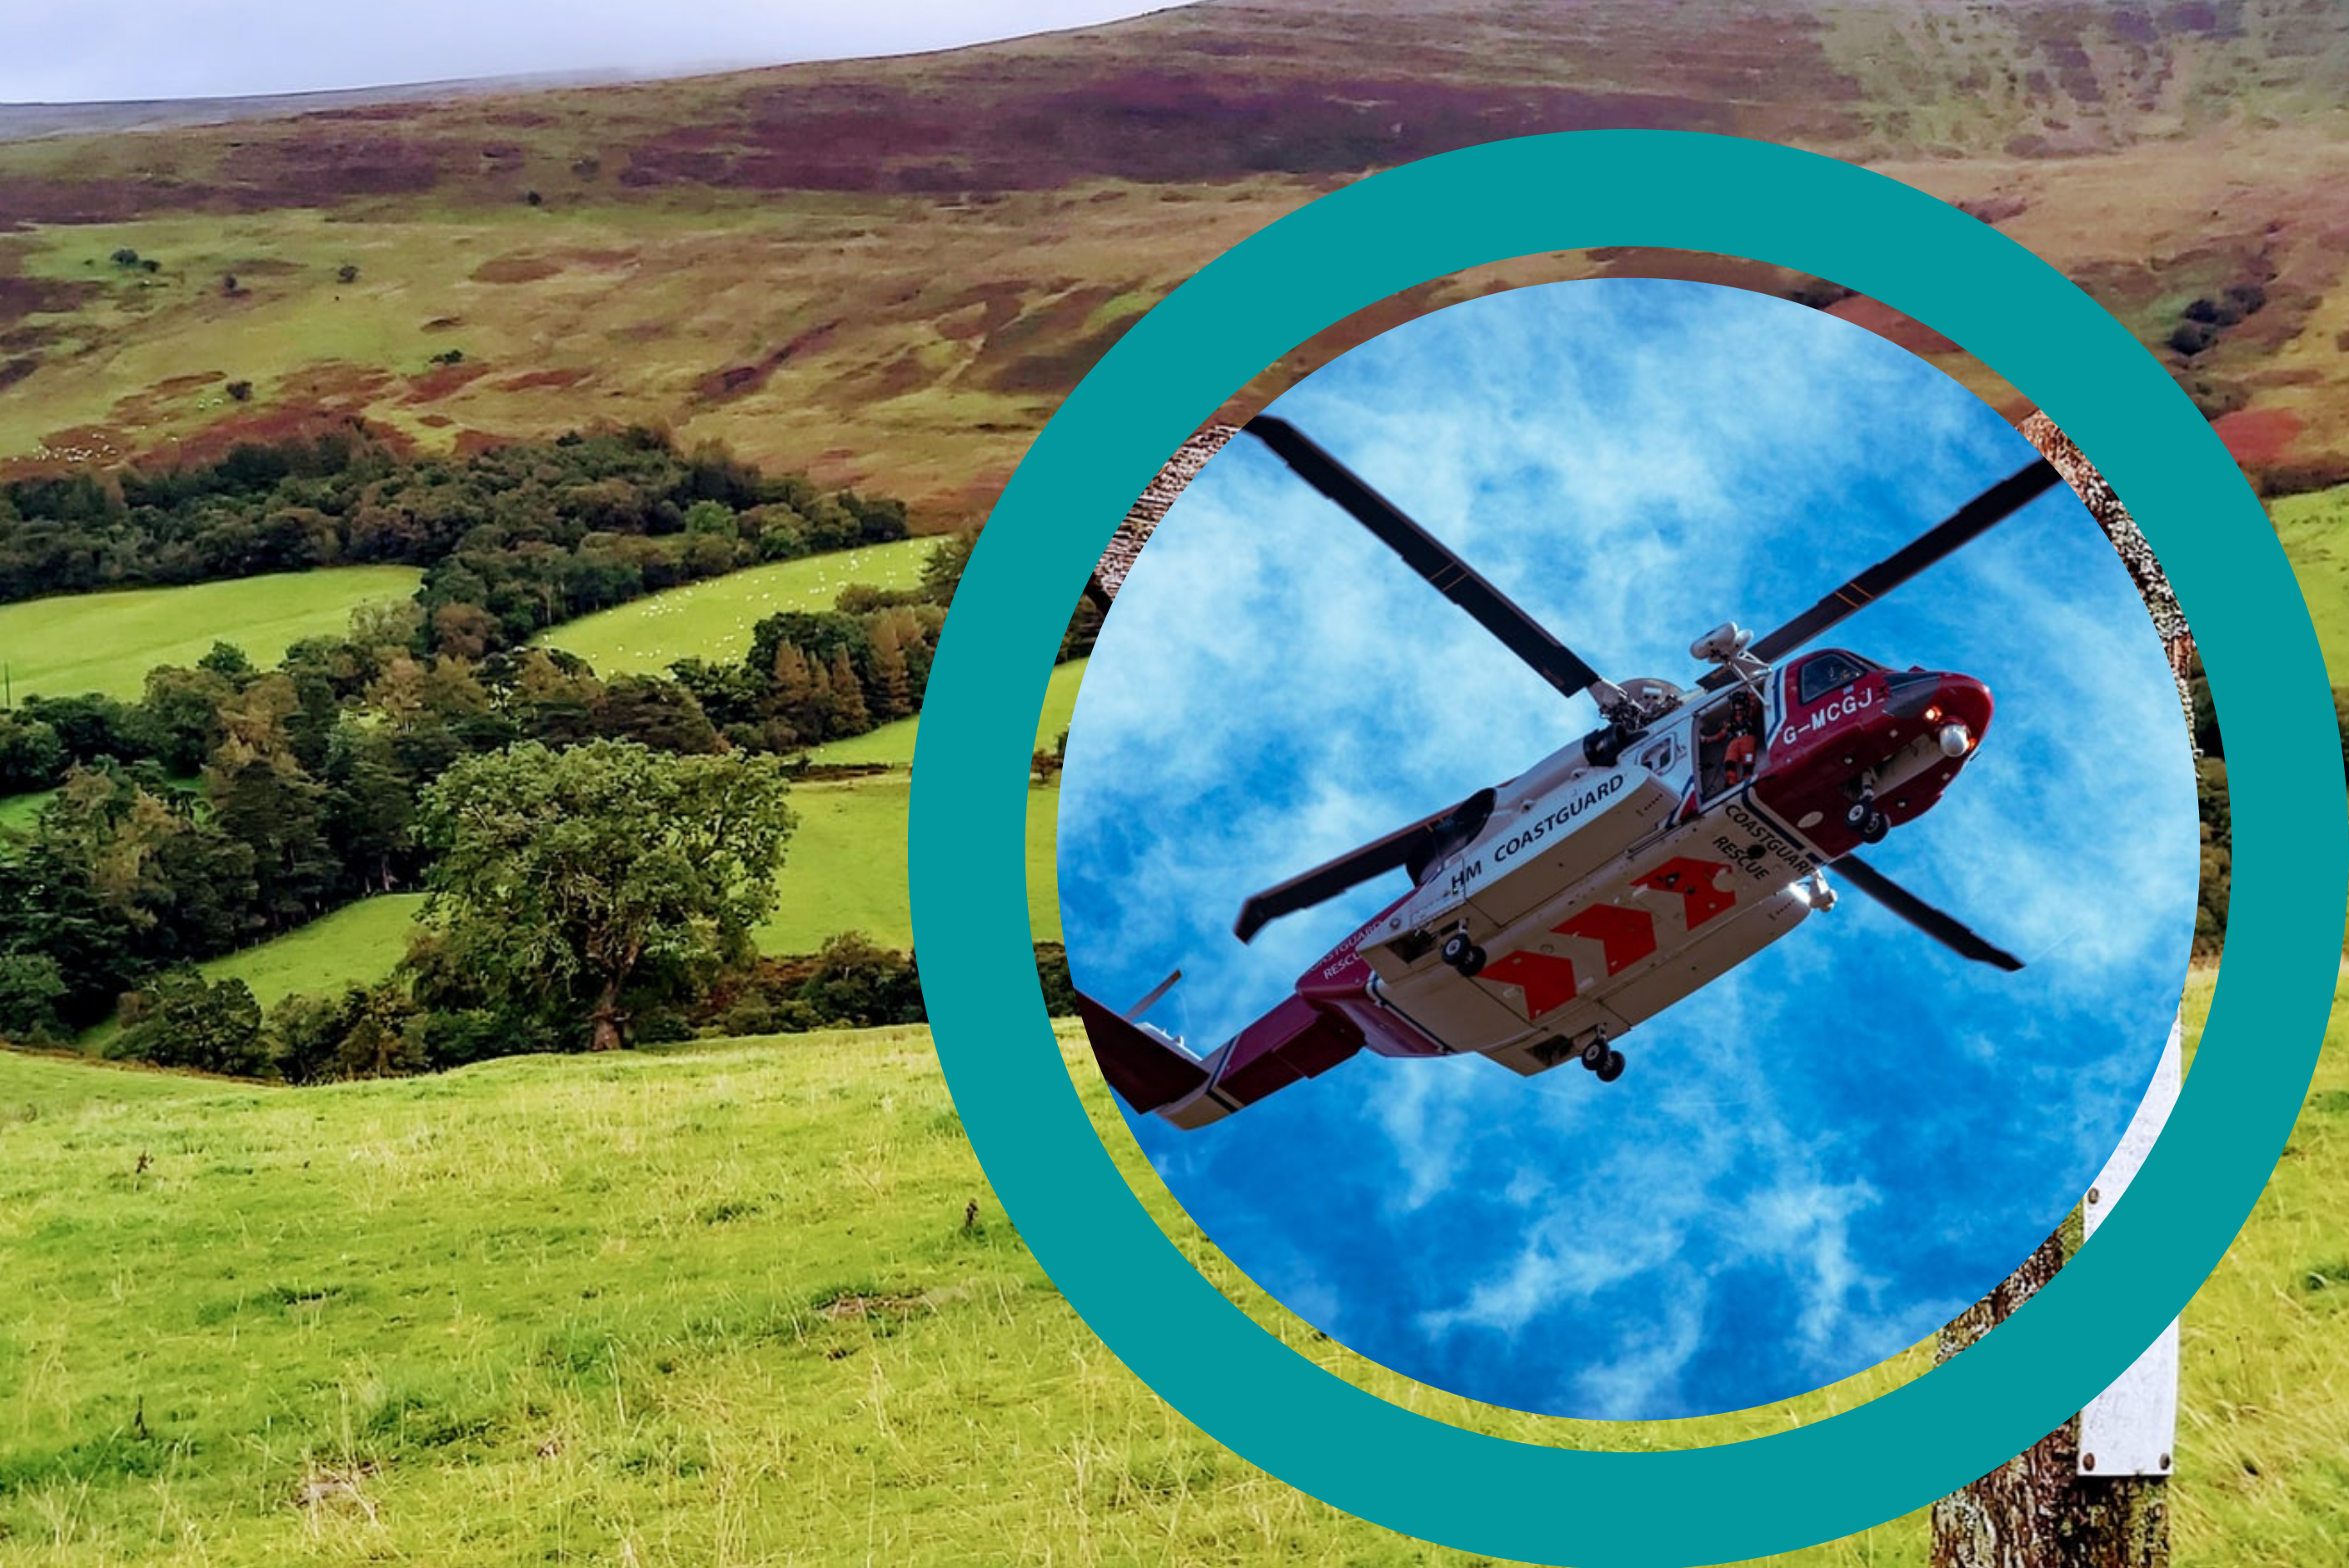 NEWS | 90-year-old man rescued by Mountain Rescue Team in Brecon Beacons